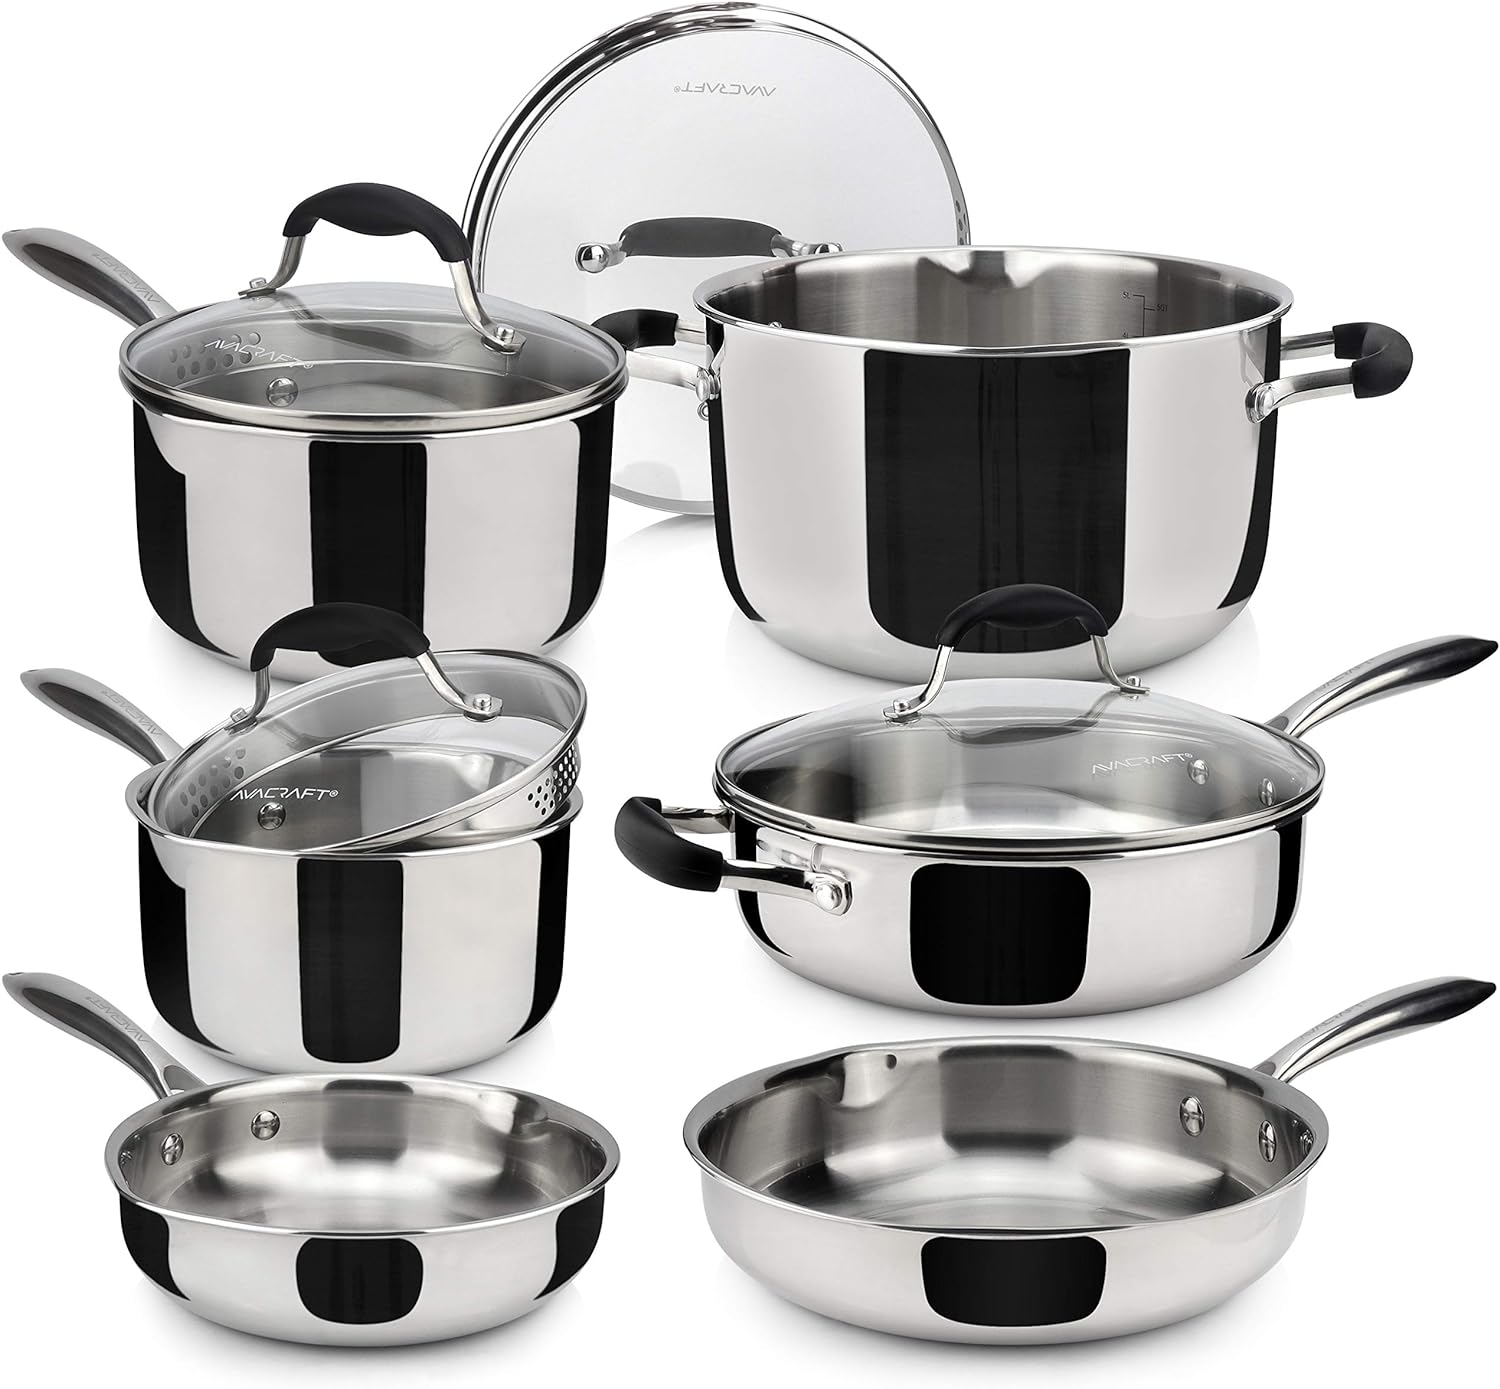 avacraft-1810-stainless-steel-cookware-set